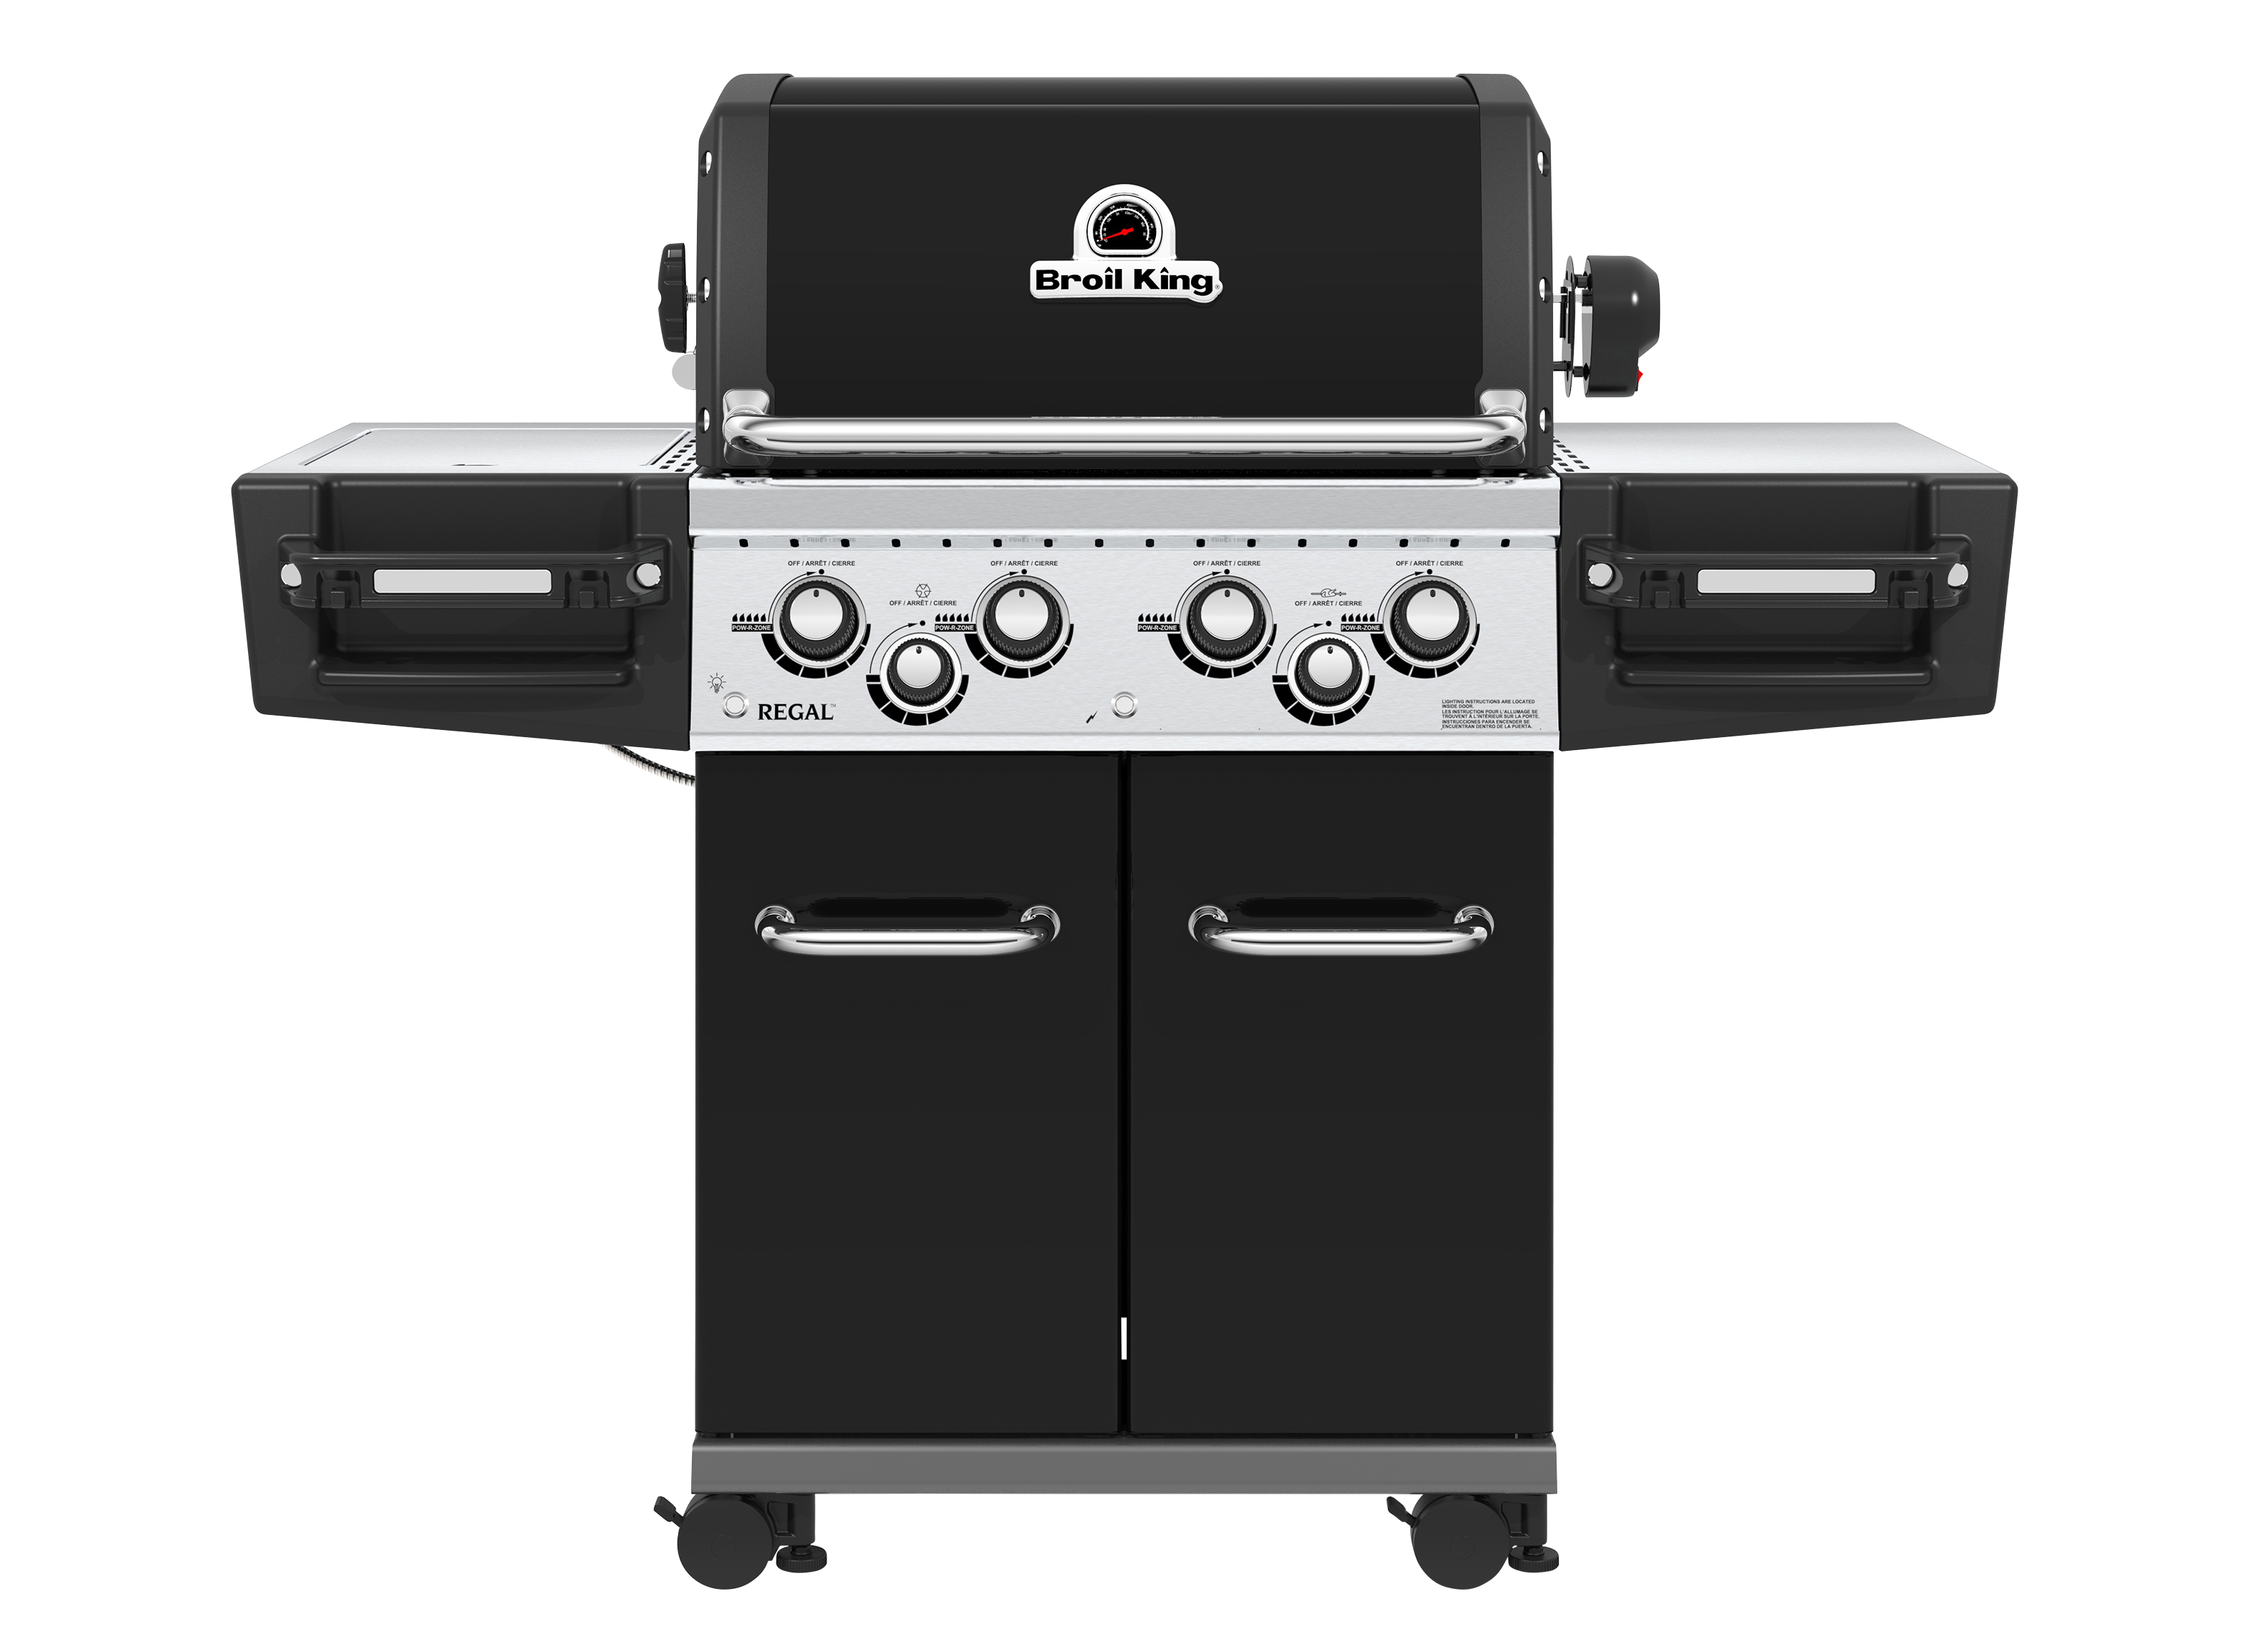 Donau ironi Orkan Broil King Regal 490 Pro 956244 Grill Review - Consumer Reports